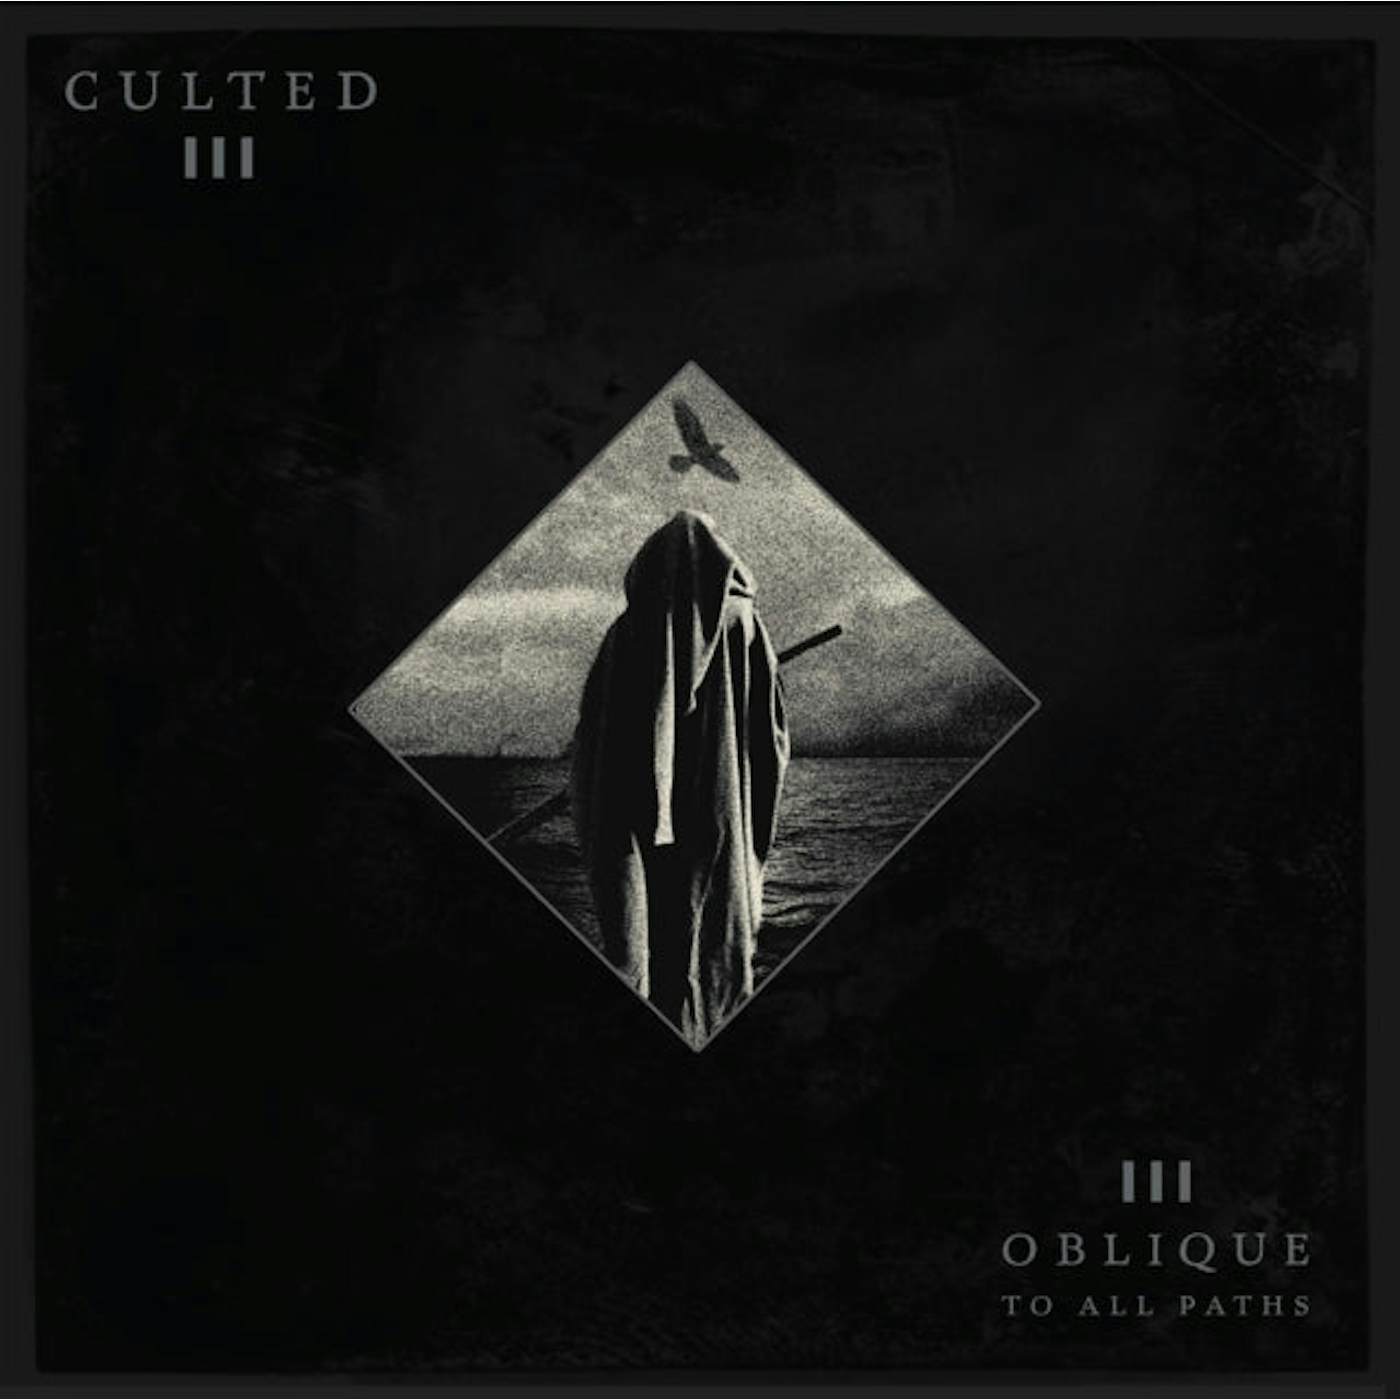 Culted LP - Oblique To All Paths (Vinyl)